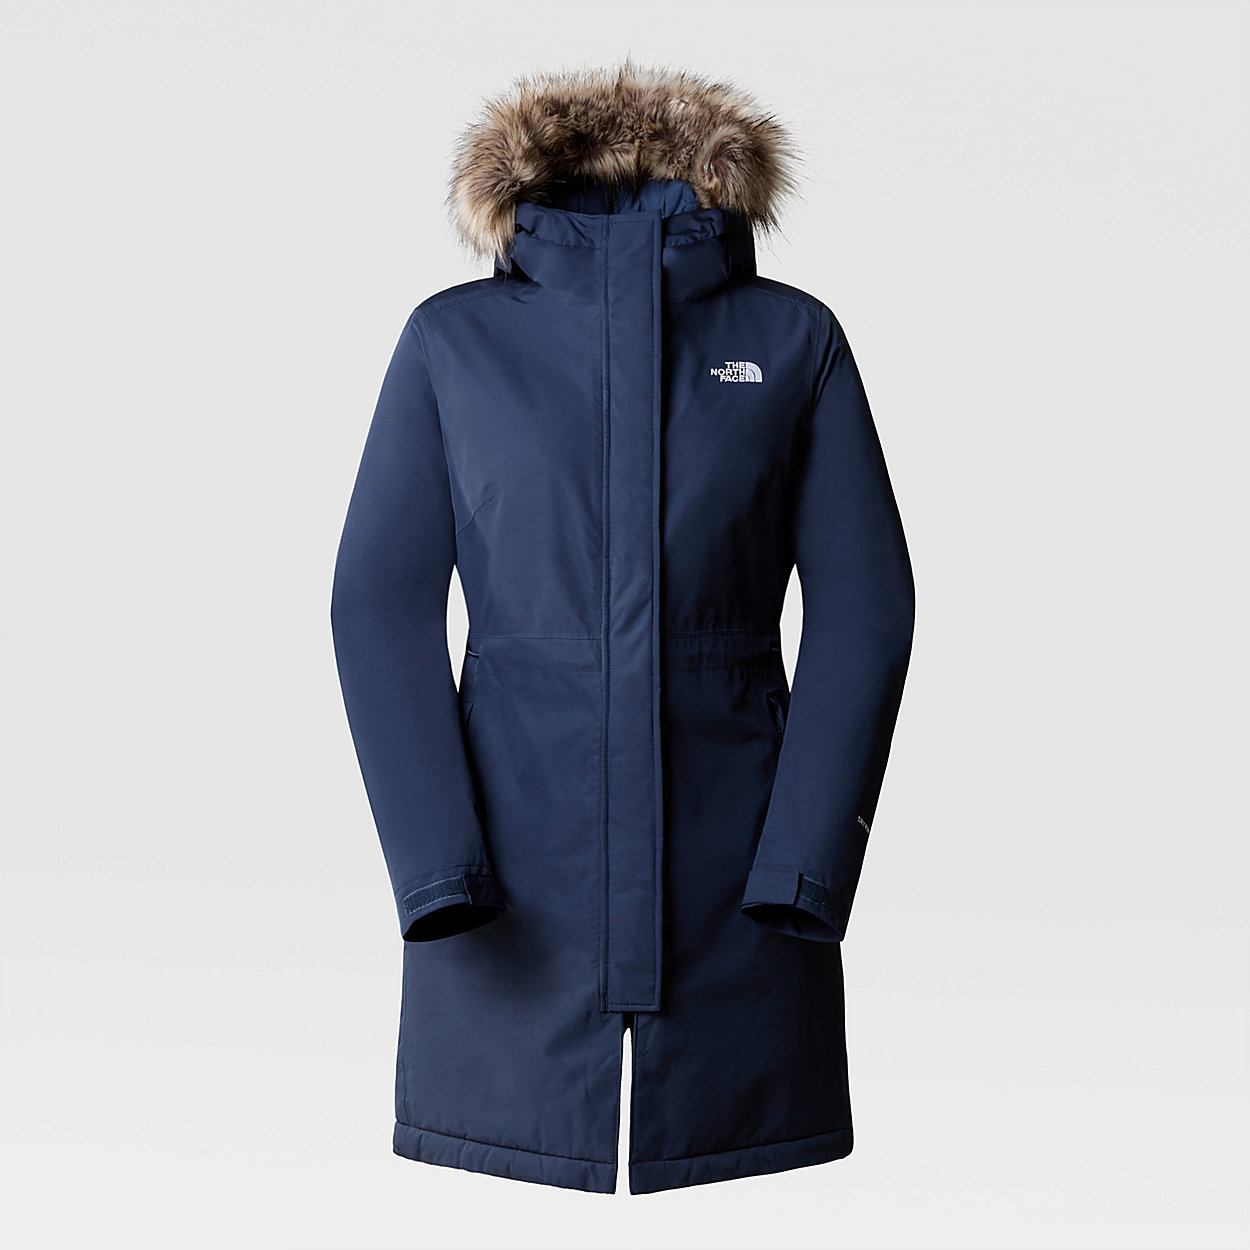 Unlock Wilderness' choice in the Trespass Vs North Face comparison, the Recycled Zaneck Parka by The North Face